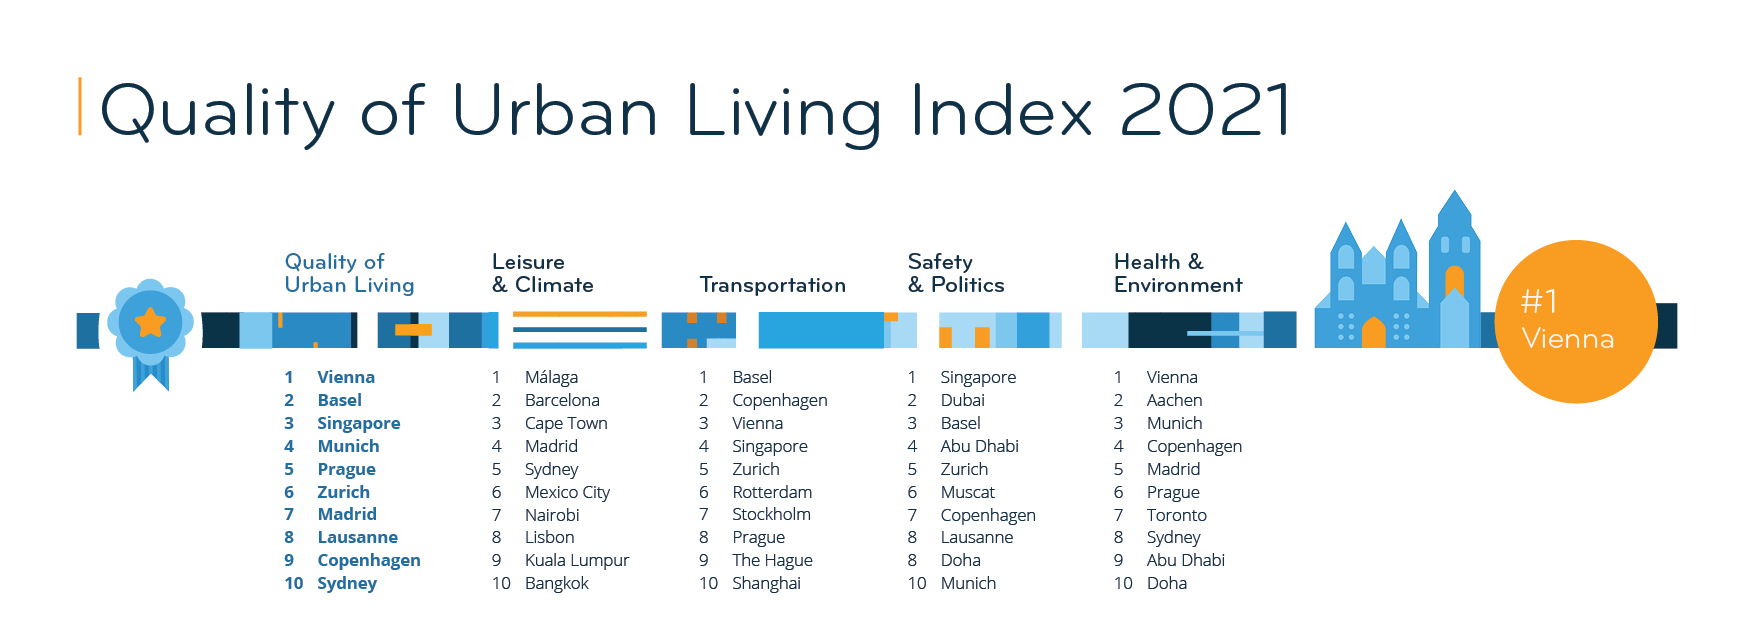 What are the top 3 cities by quality of life?